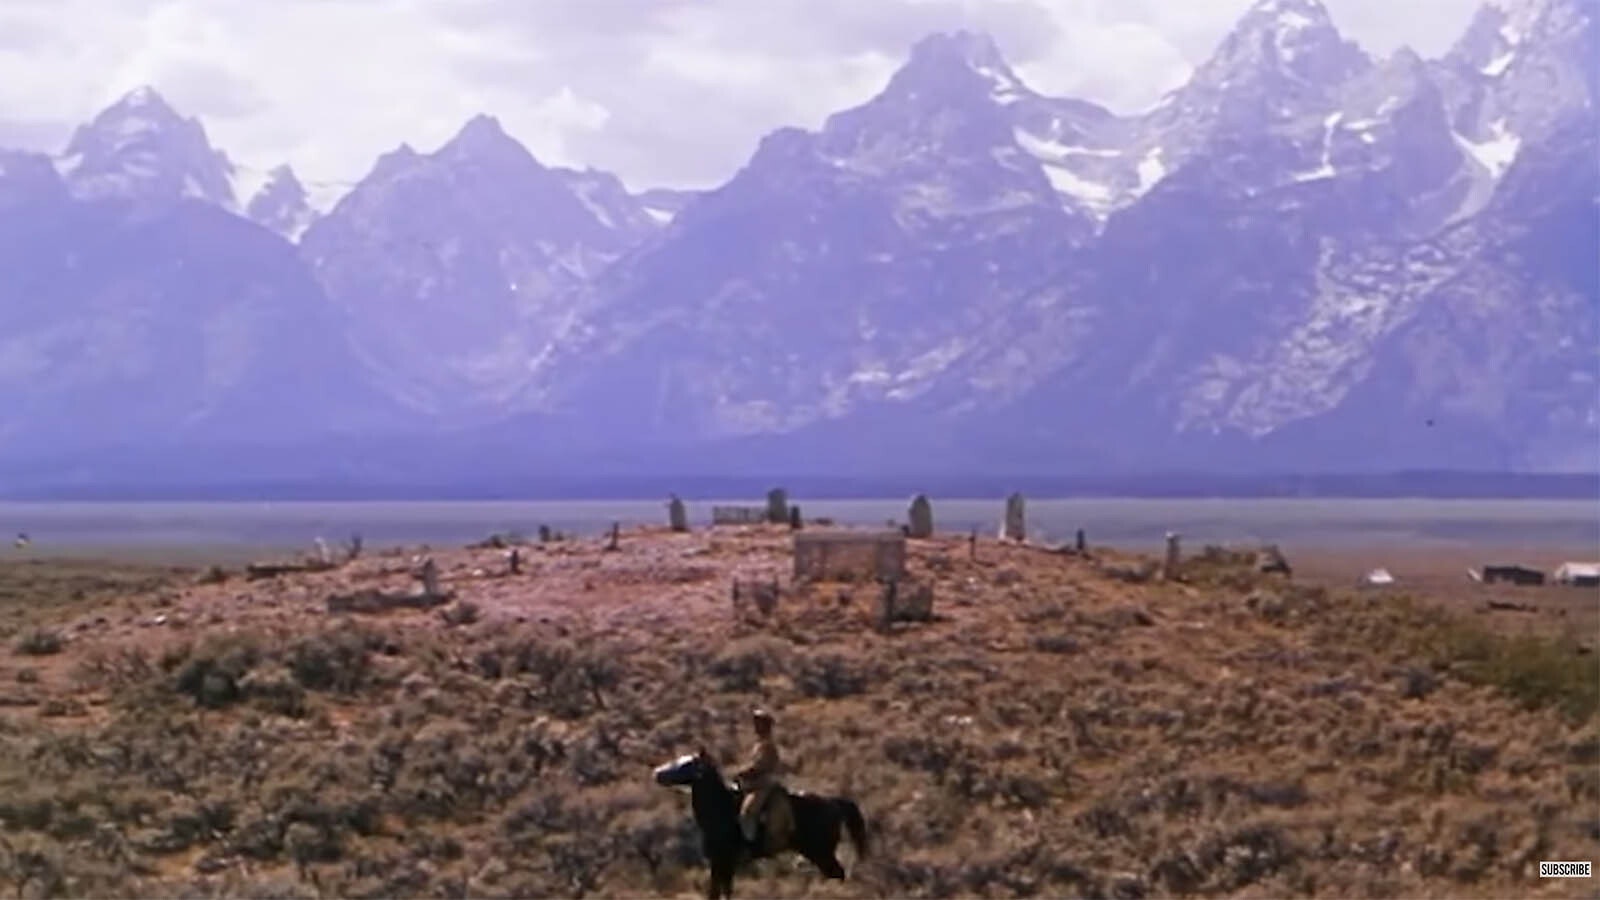 A scene from "Shane" set in front of a graveyard with the Grand Tetons in the background.